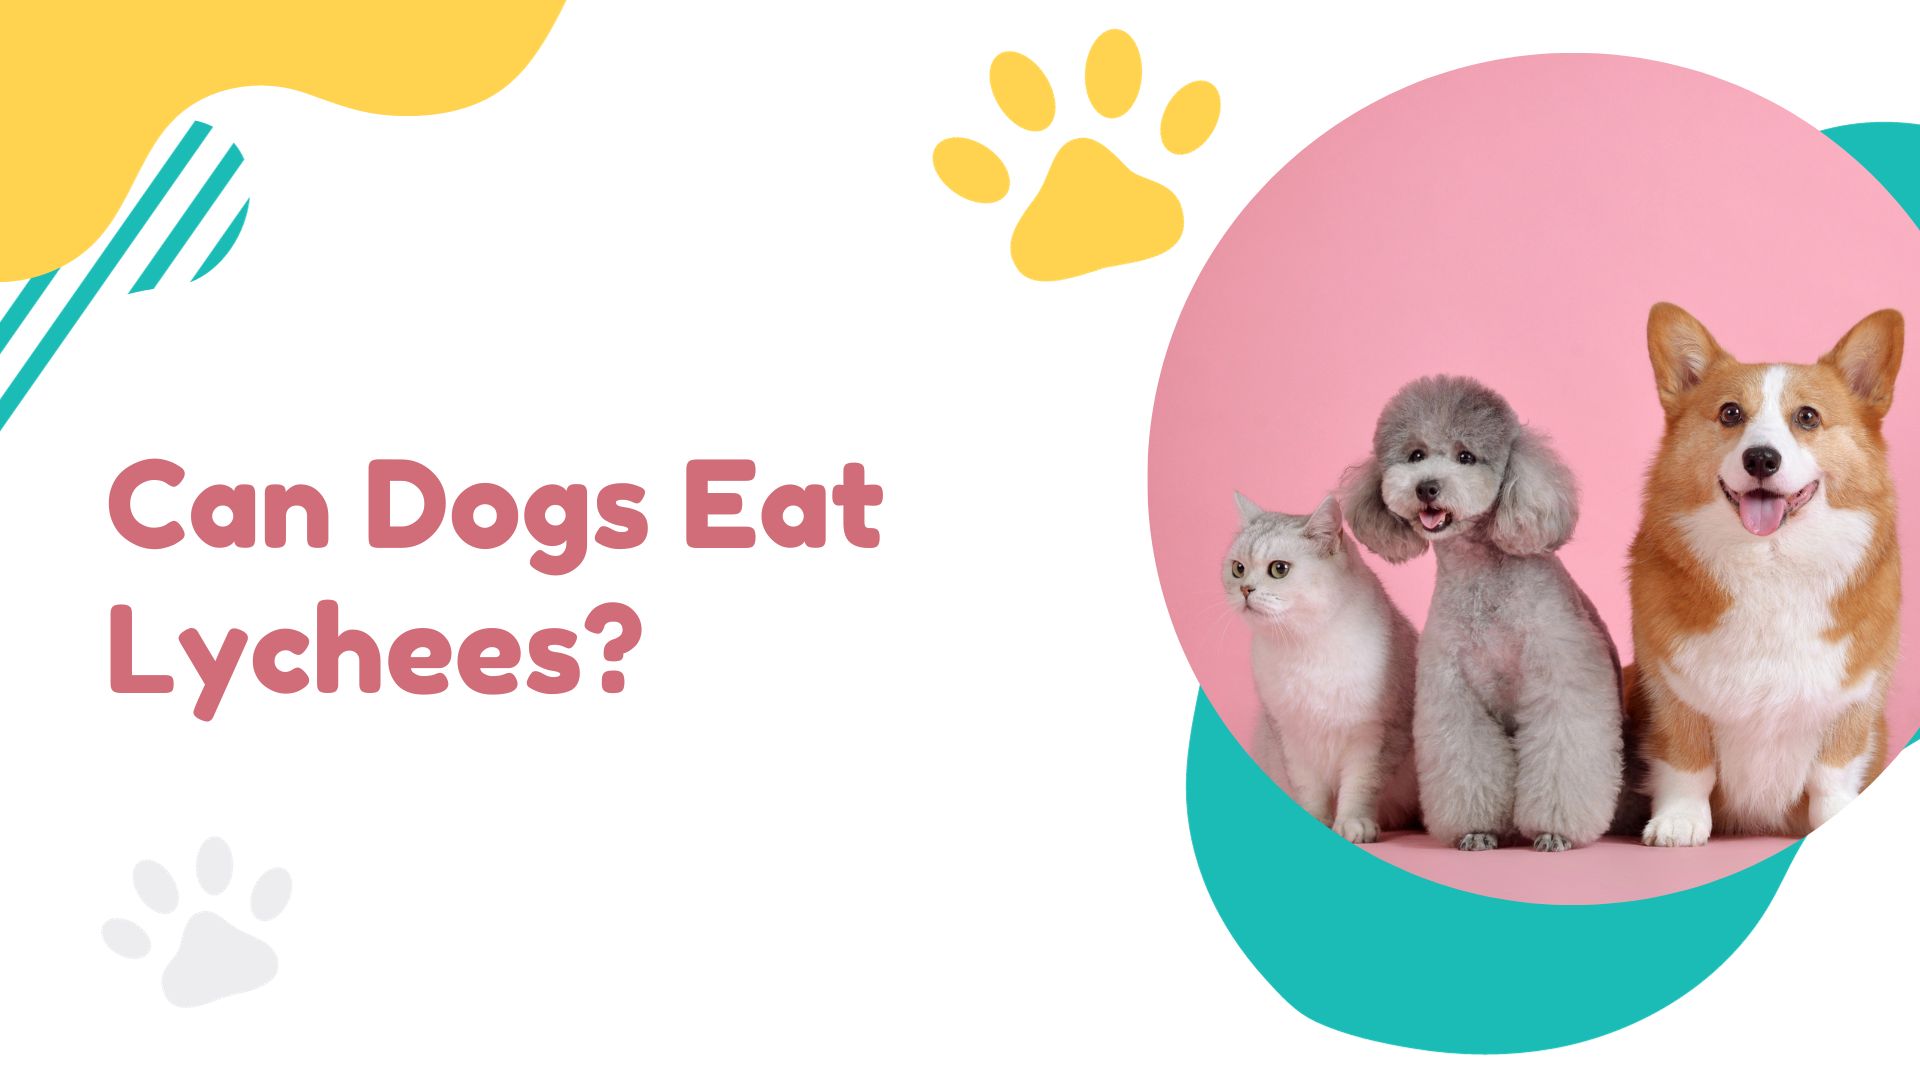 Can Dogs Eat Lychees?